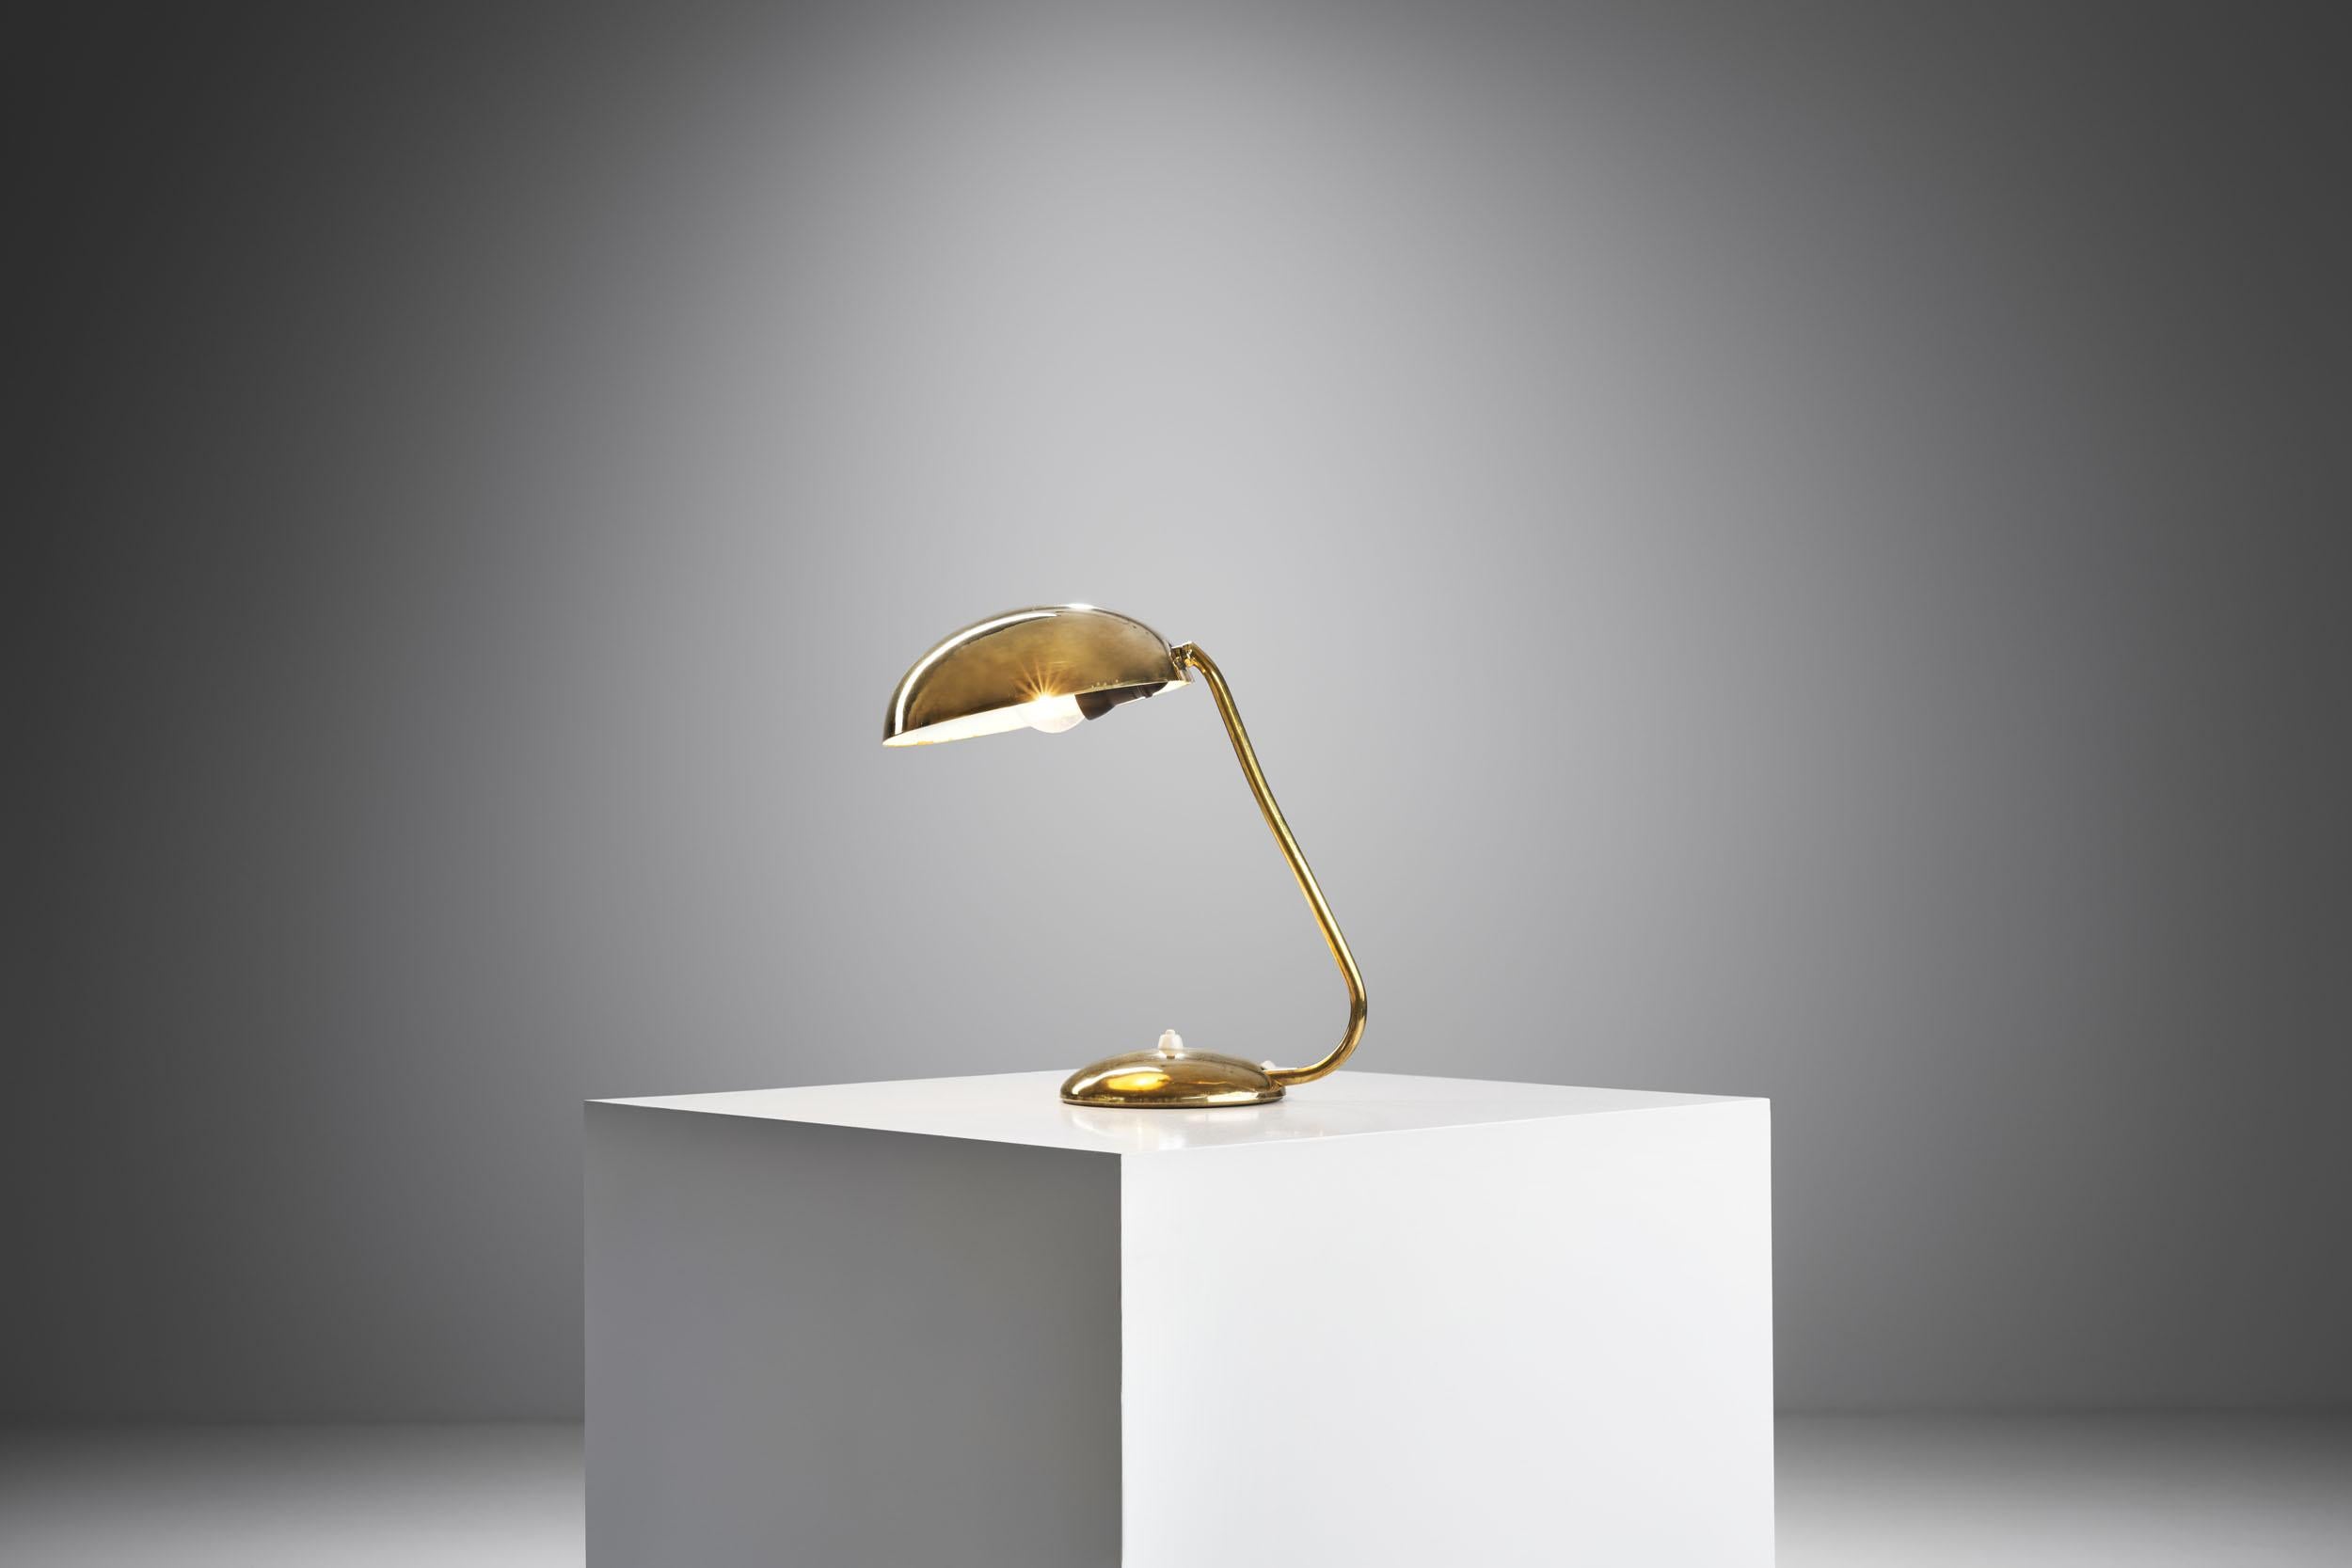 Finnish mid-century lighting design is world-famous for numerous reasons. The country’s designers managed to make strictly functional design look beautiful in addition to practicality and high-quality. This Valinte Oy desk lamp perfectly illustrates